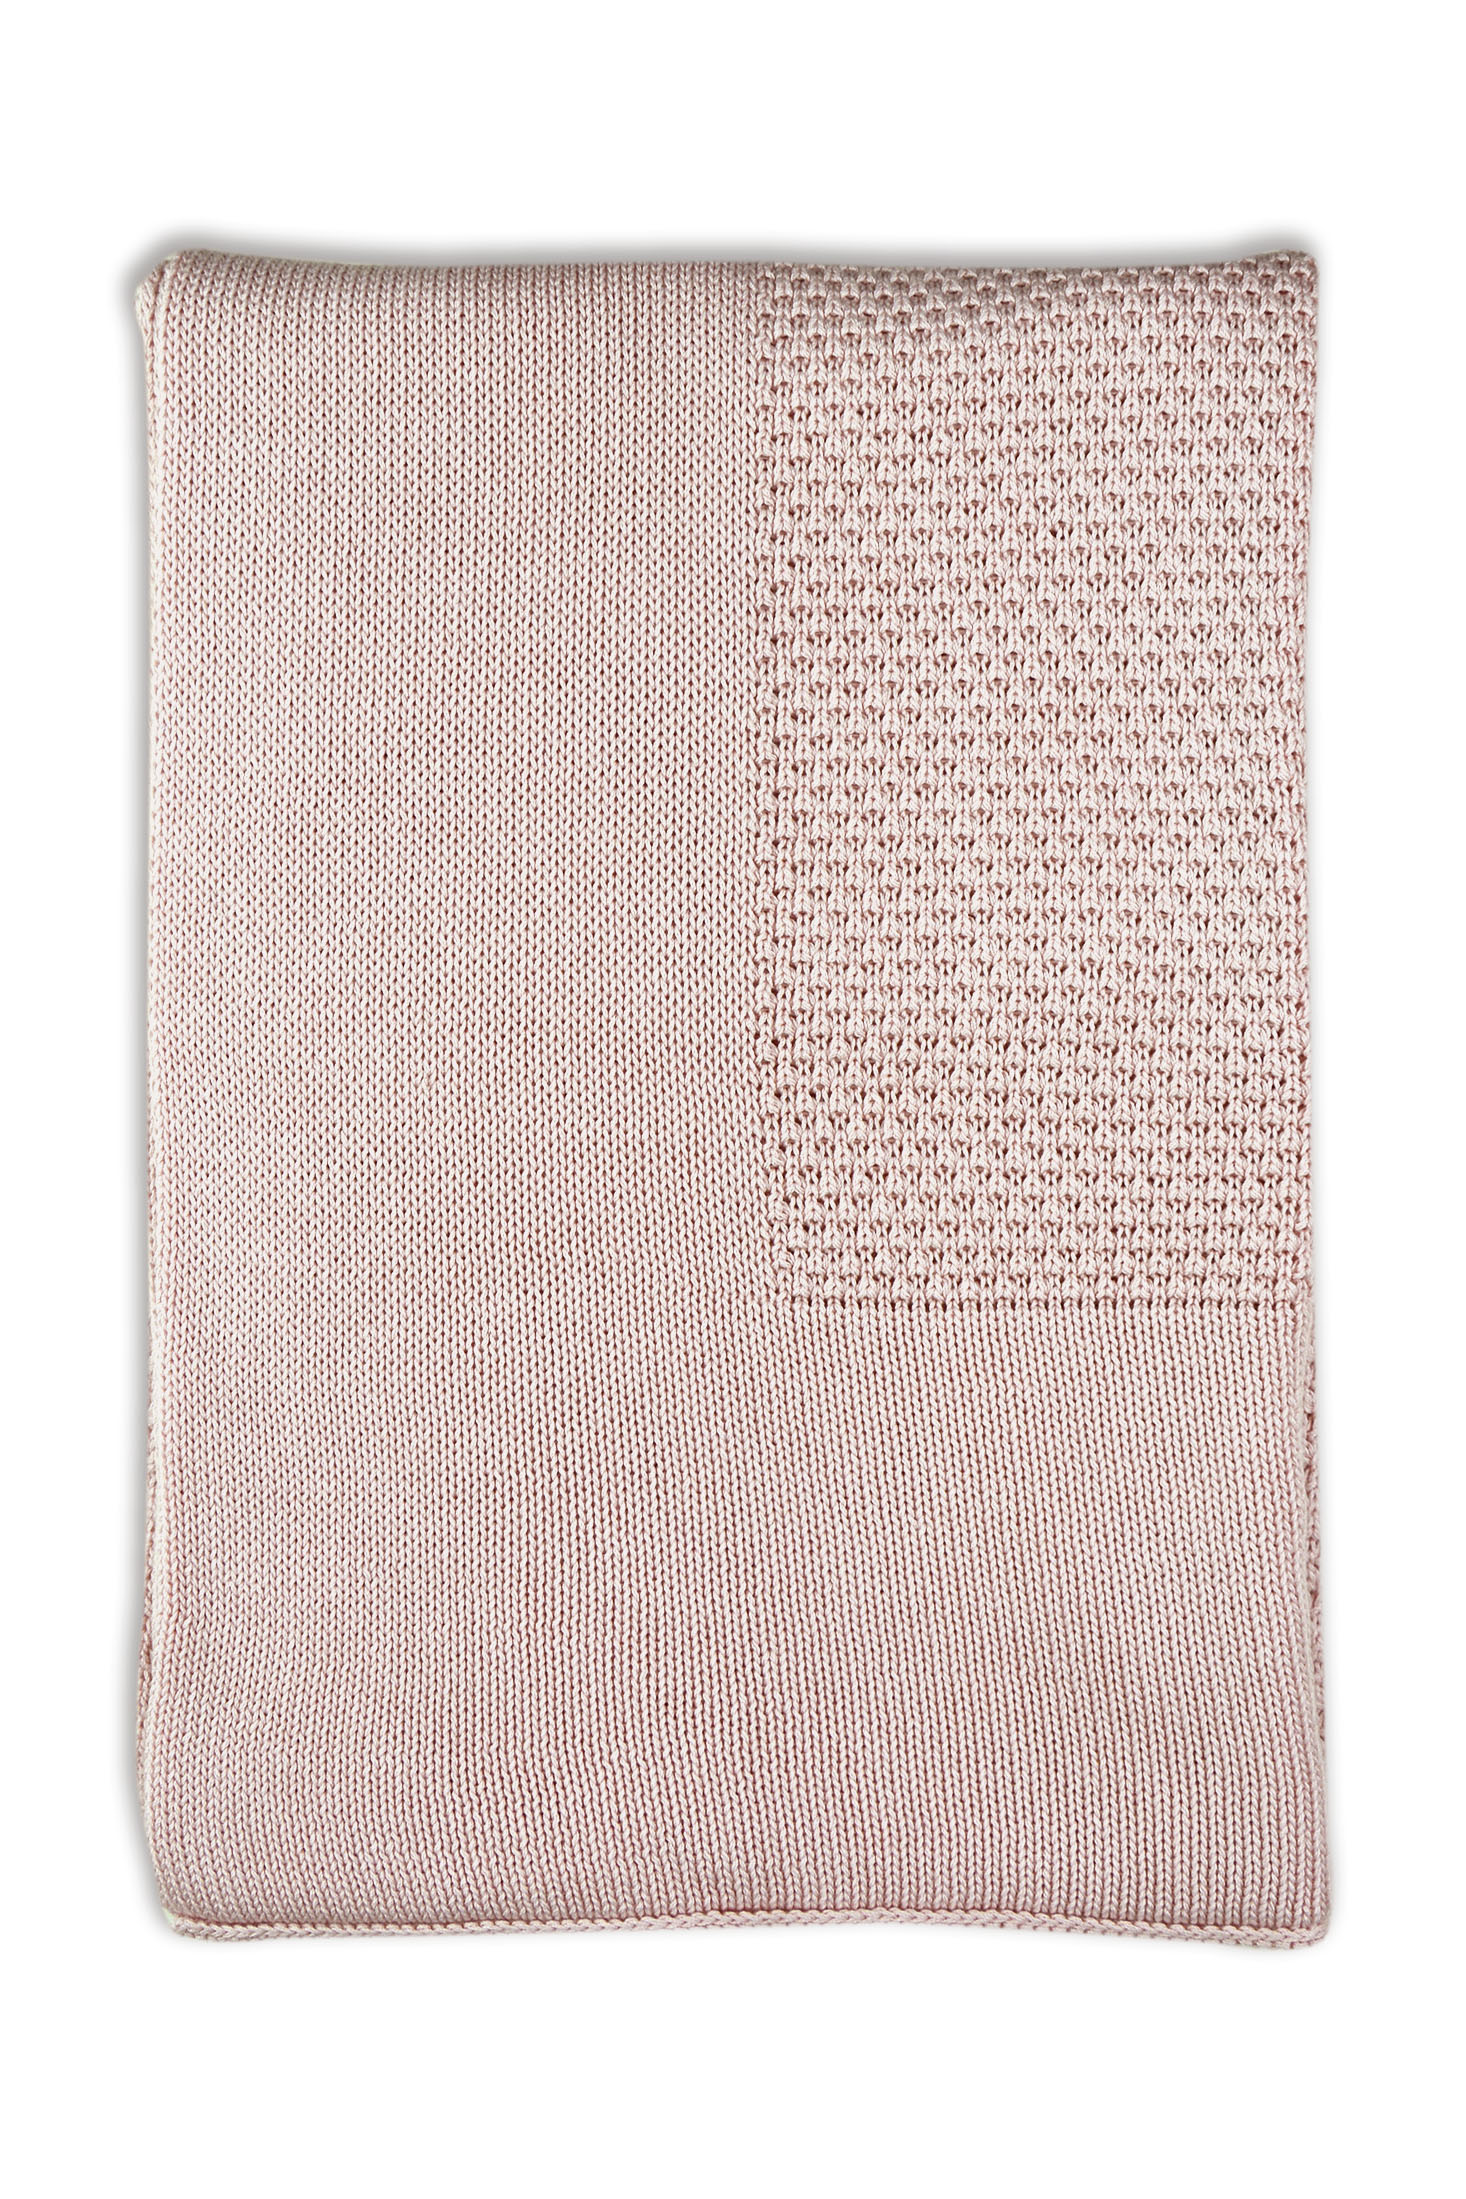 Little Bamboo Textured Blanket - Dusty Pink - Save Our Sleep® Official ...